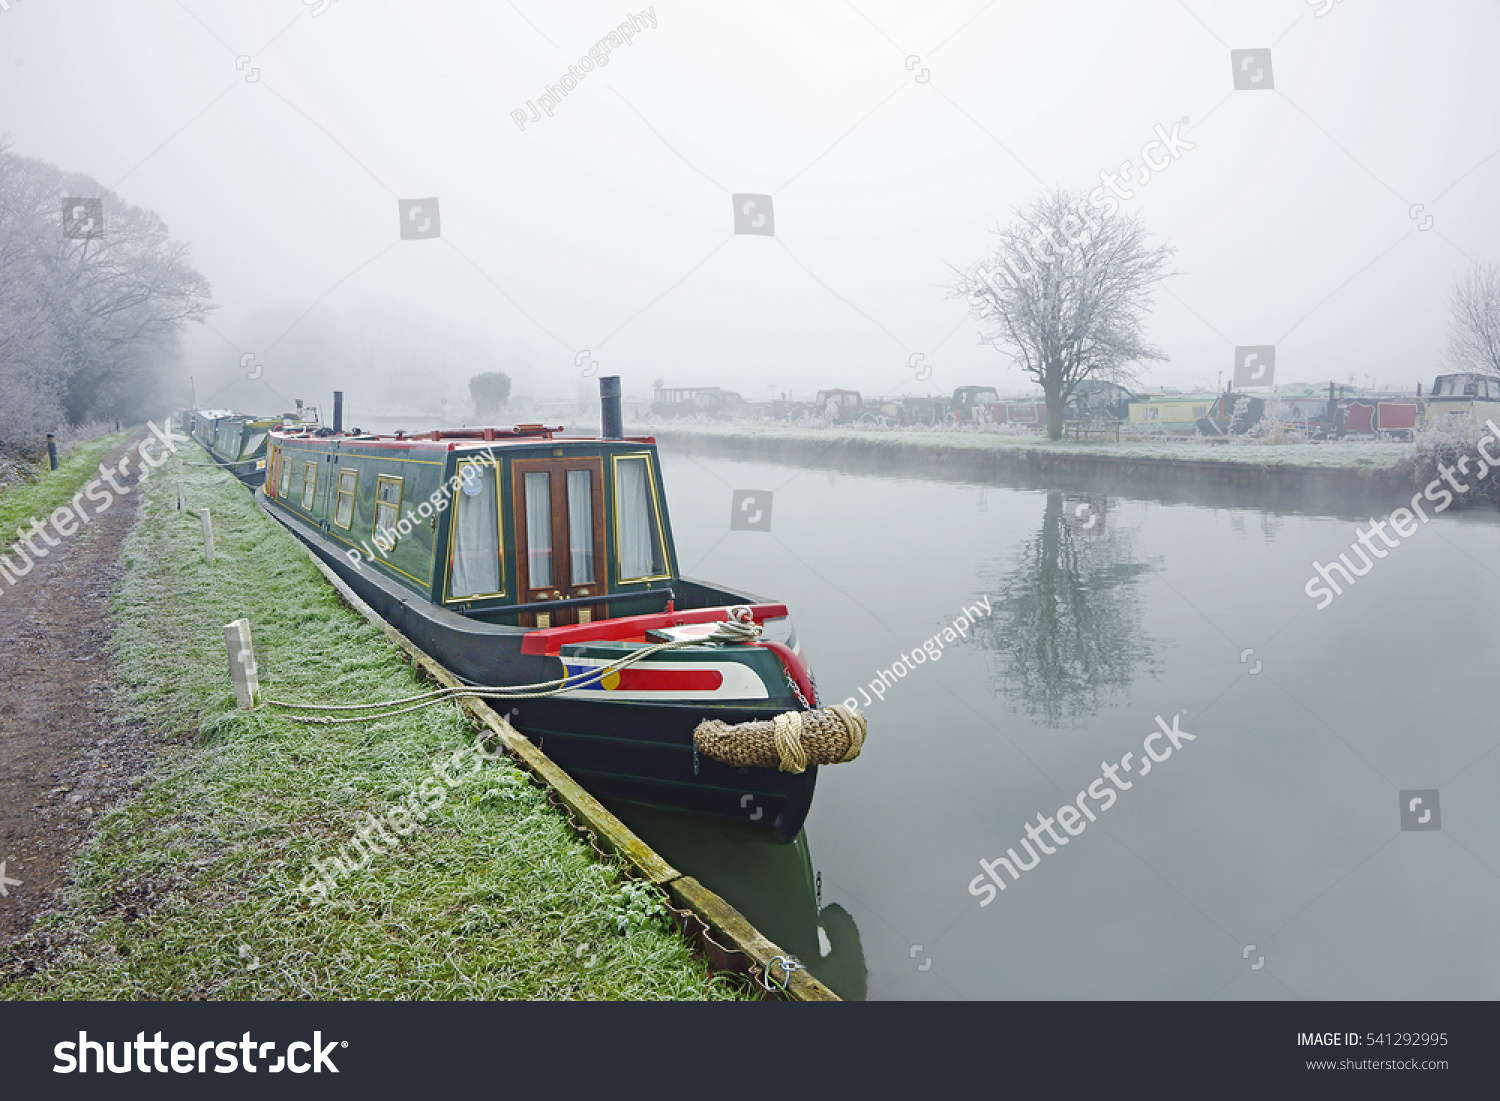 A very grey, foggy, frosty and misty early morning winter day with colourful canal barges on the Gloucester to Sharpness canal, Saul, Gloucestershire, England, United Kingdom
 #541292995